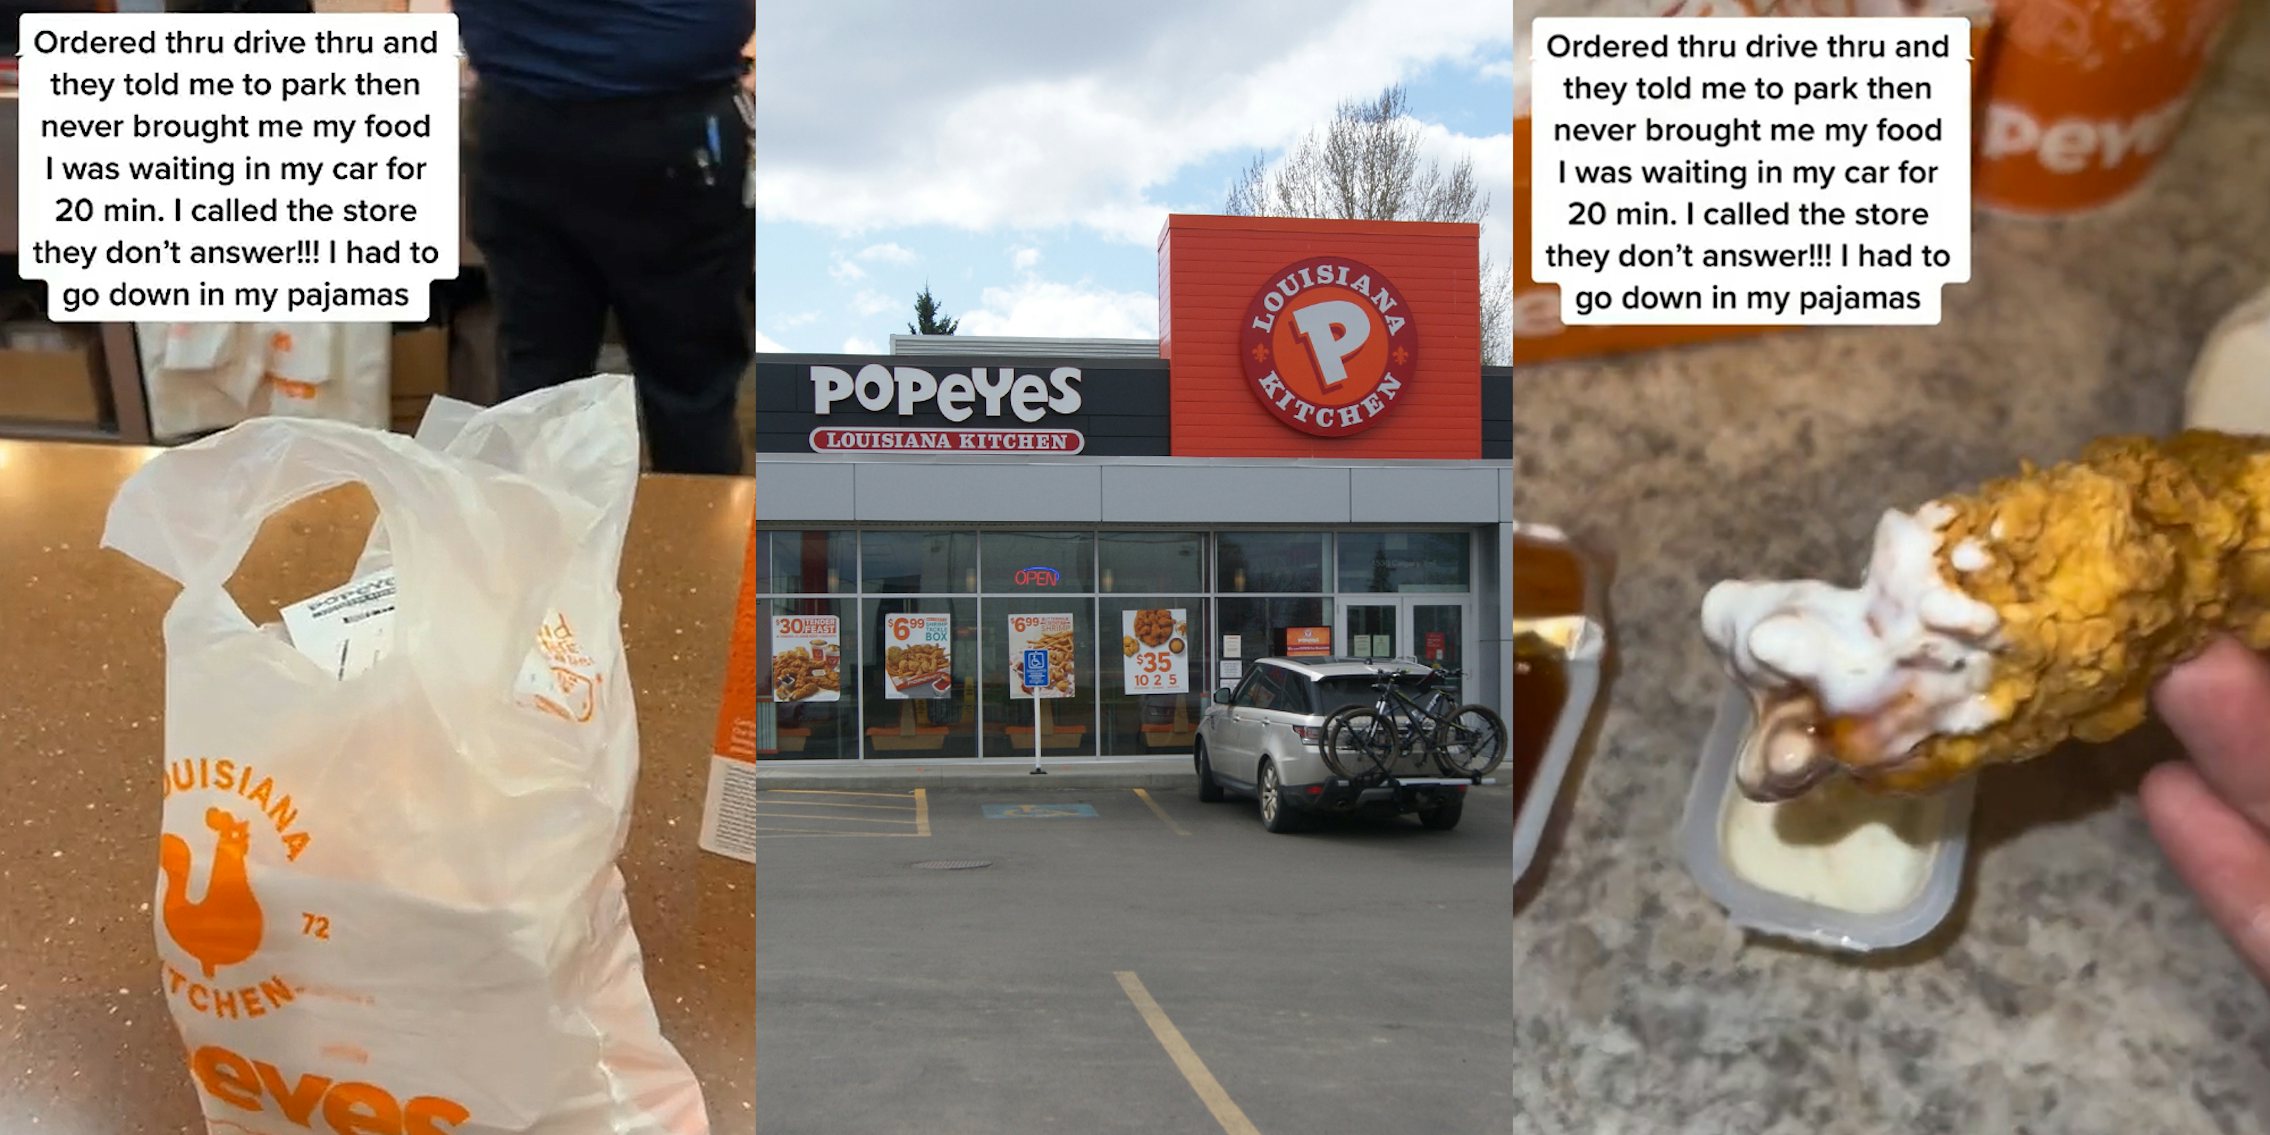 Popeyes food in bag on Popeyes counter caption 'Ordered thru drive thru and they told me to park then never brought me my food I was waiting in my car for 20 min. I called the store they don't answer!!! I had to go down in my pajamas' (l) Popeyes sign on building with parking lot (c) person holding dipped in ranch piece of chicken caption 'Ordered thru drive thru and they told me to park then never brought me my food I was waiting in my car for 20 min. I called the store they don't answer!!! I had to go down in my pajamas' (r)